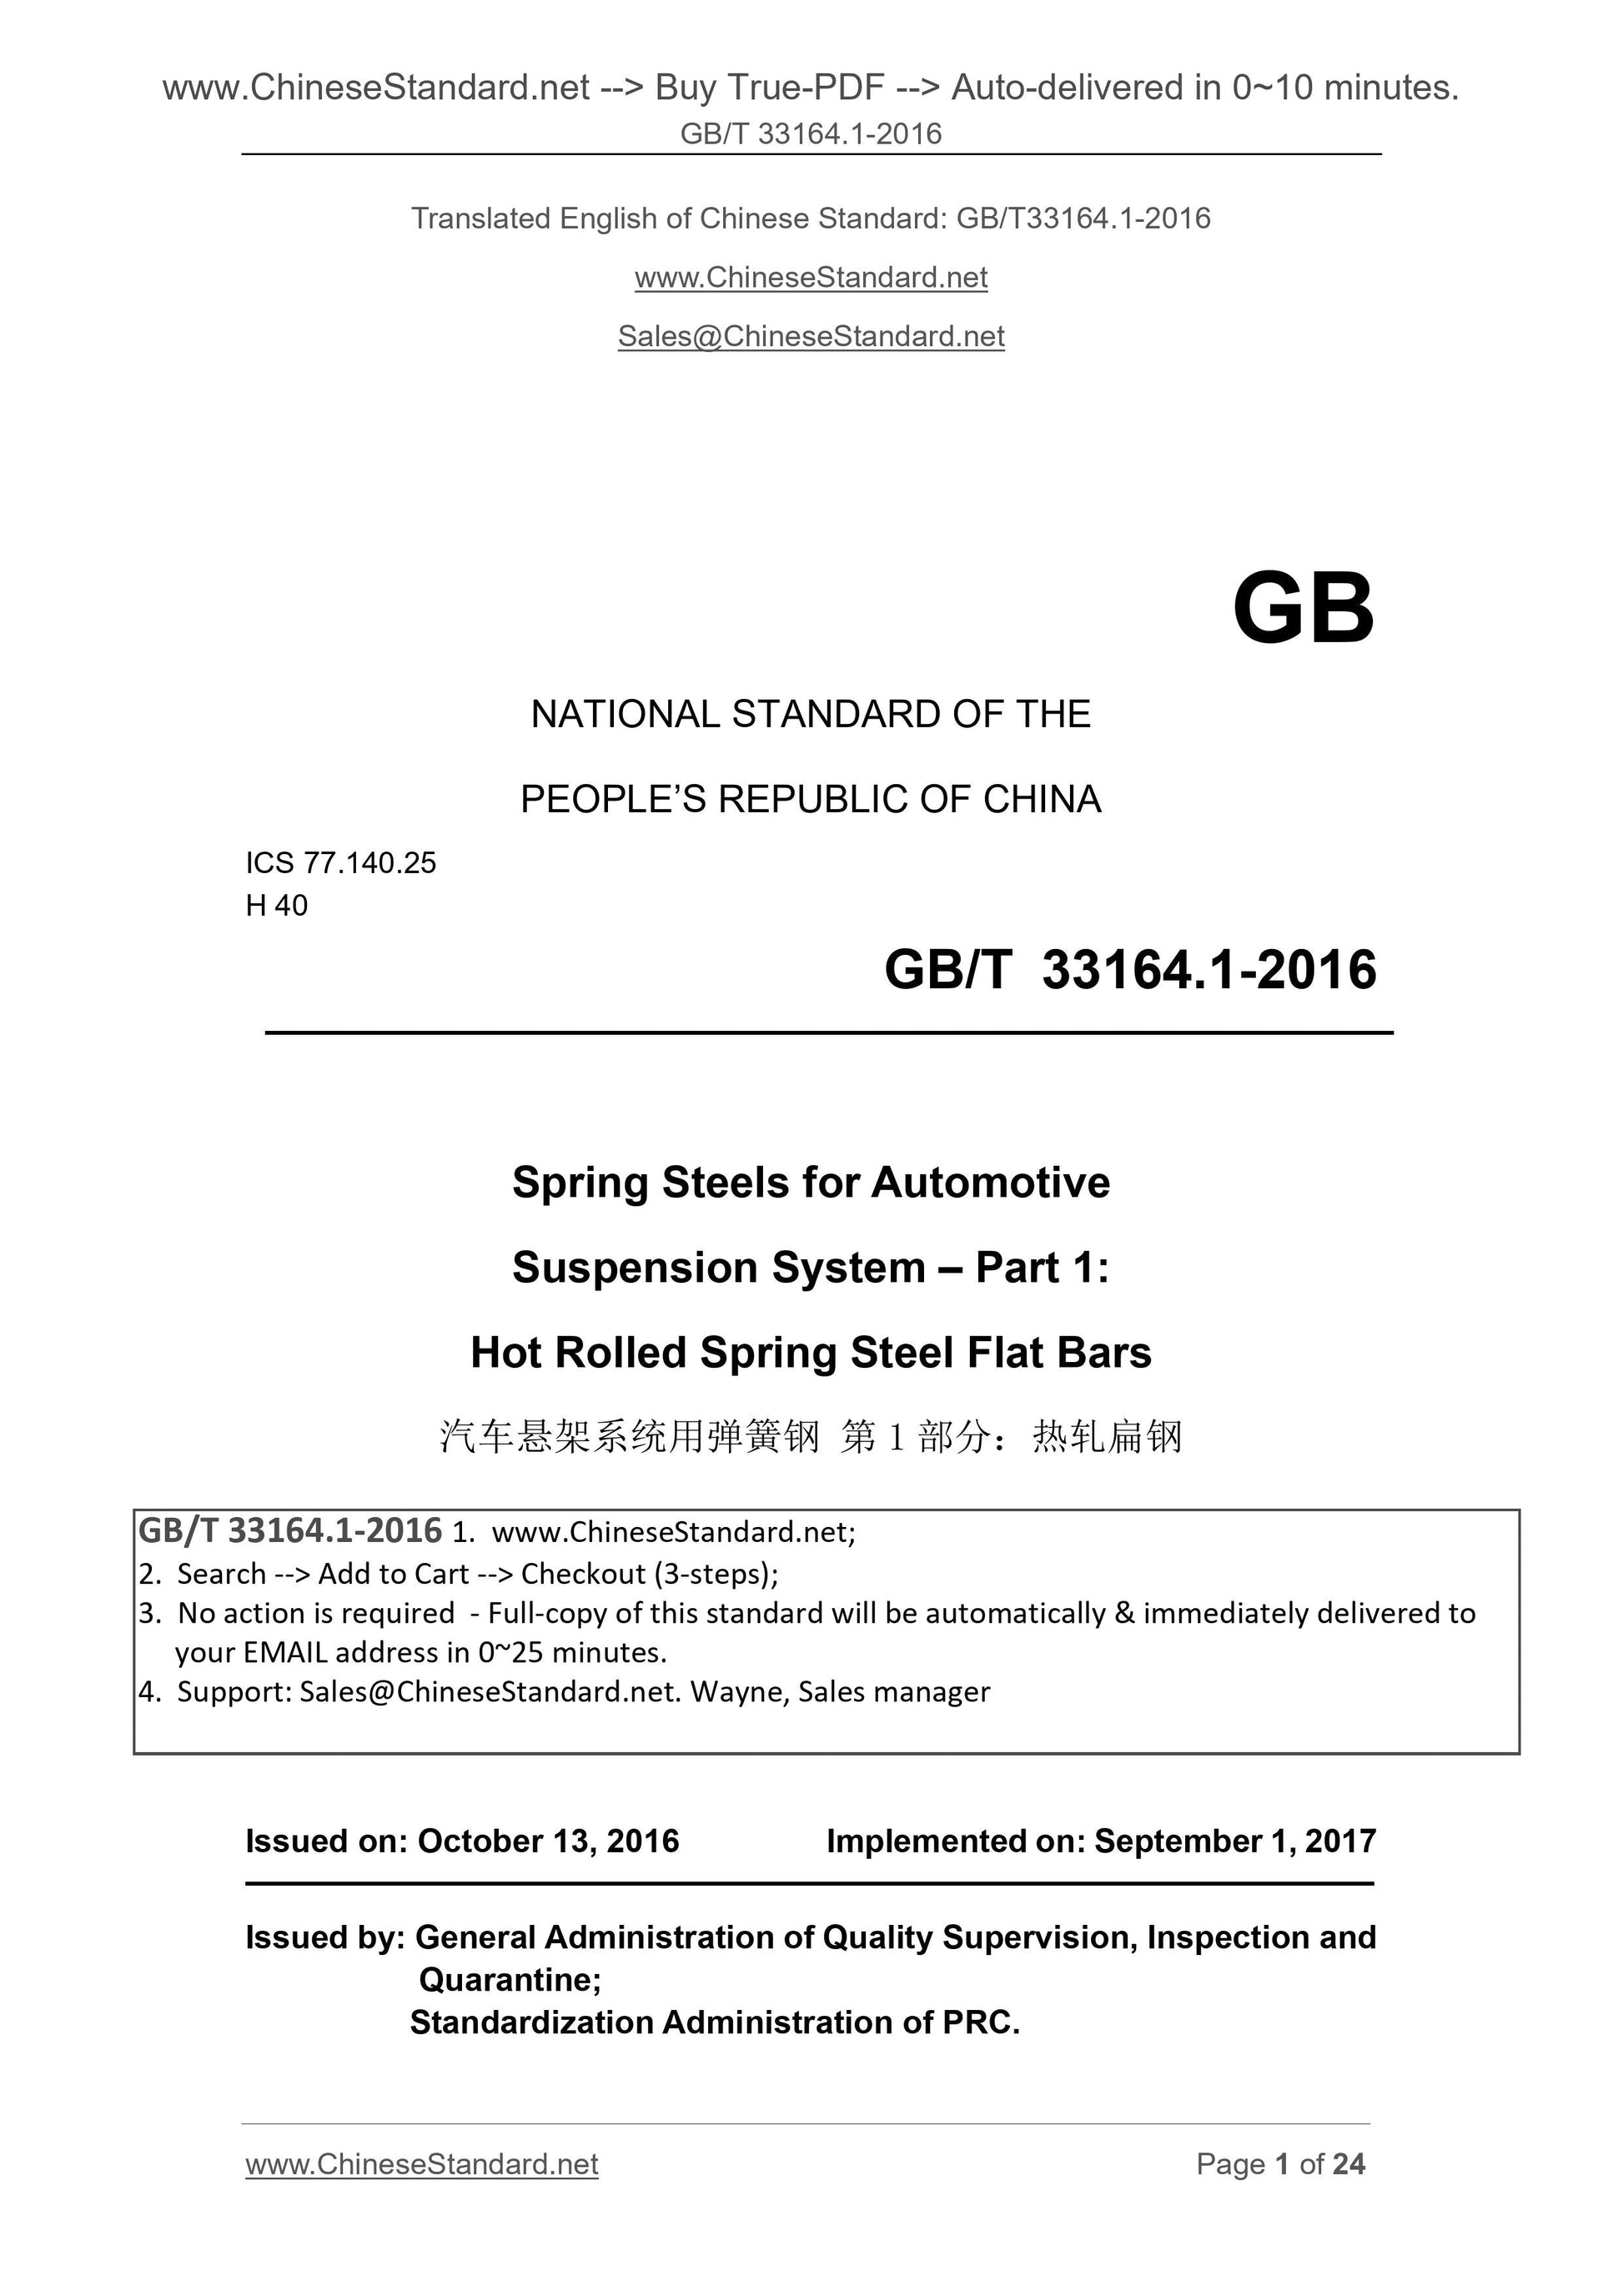 GB/T 33164.1-2016 Page 1